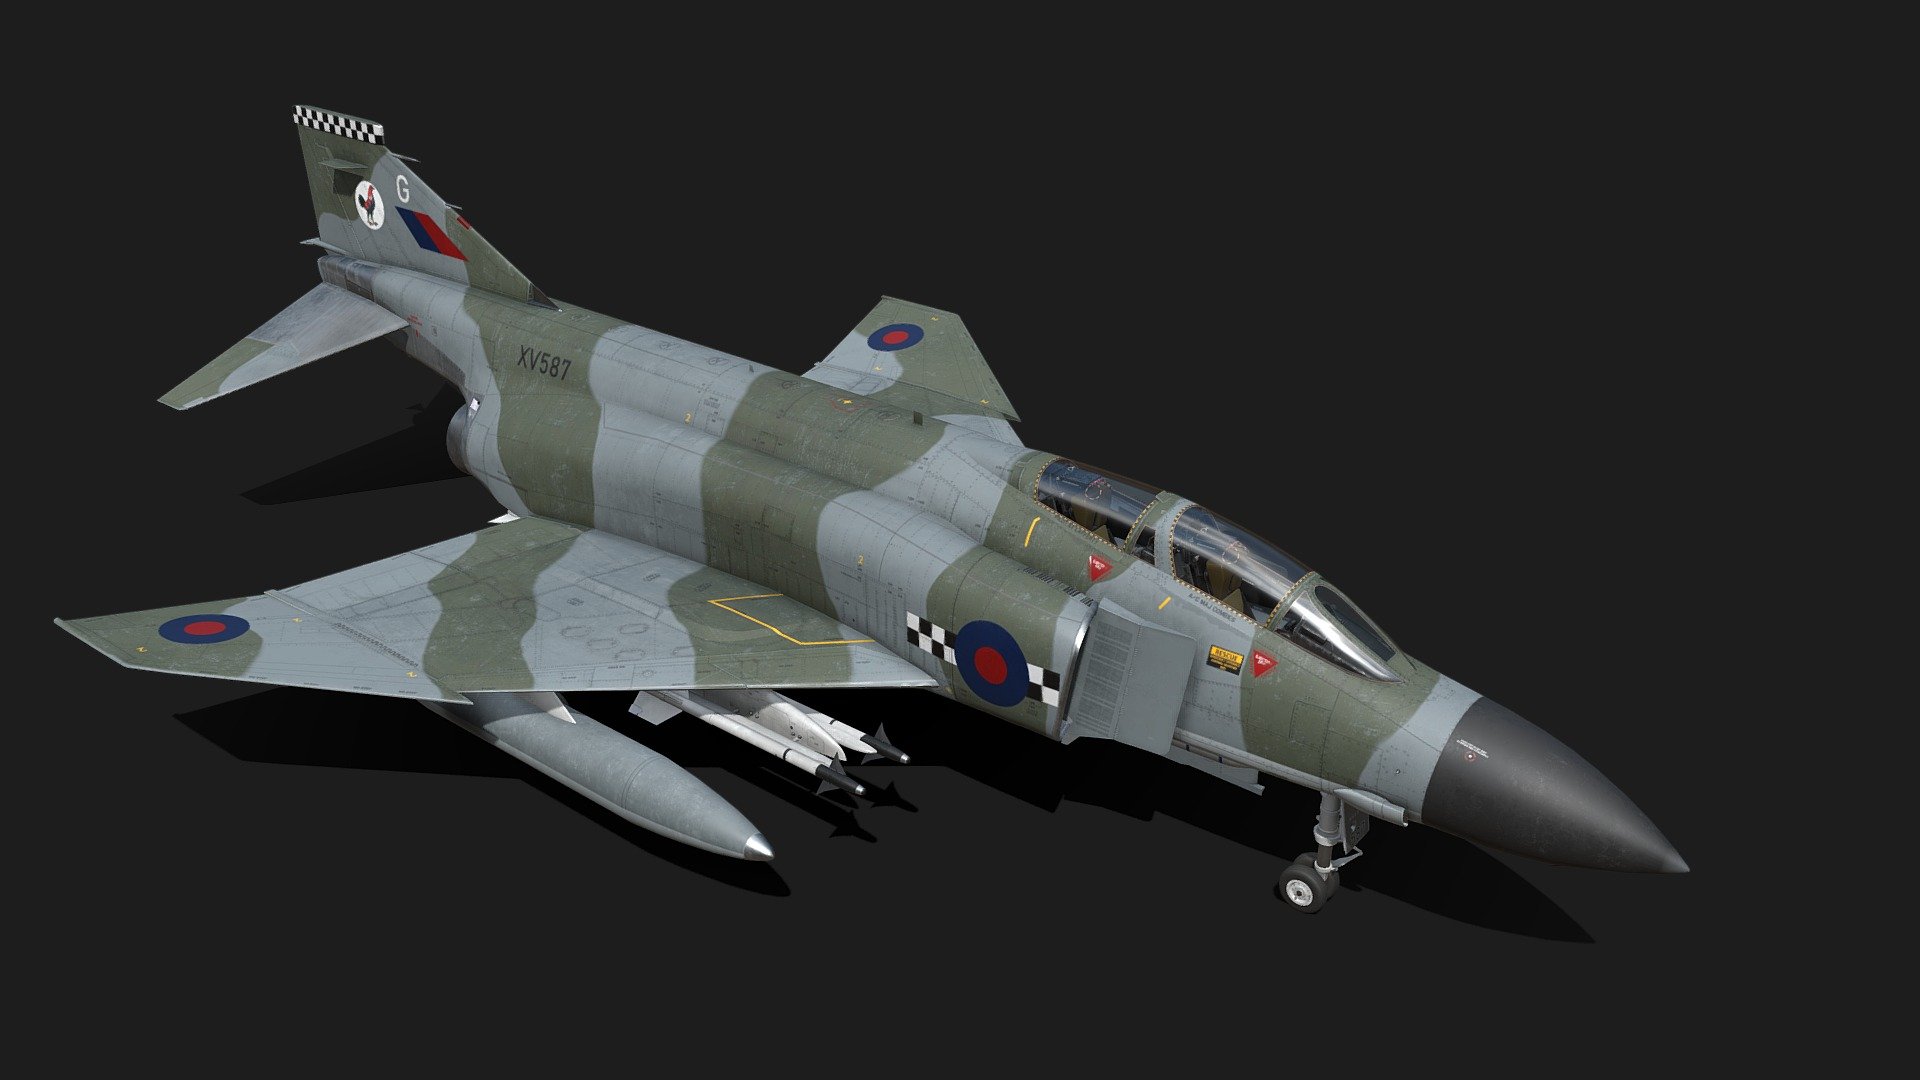 The United Kingdom (UK) operated the McDonnell Douglas F-4 Phantom II as one of its principal combat aircraft from 1968 to 1992. The UK was the first export customer for the F-4 Phantom, which was ordered in the context of political and economic difficulties around British designs for the roles that it eventually undertook. The Phantom was procured to serve in both the Royal Navy's Fleet Air Arm (FAA) and the Royal Air Force (RAF) in several roles including air defence, close air support, low-level strike and tactical reconnaissance 3d model